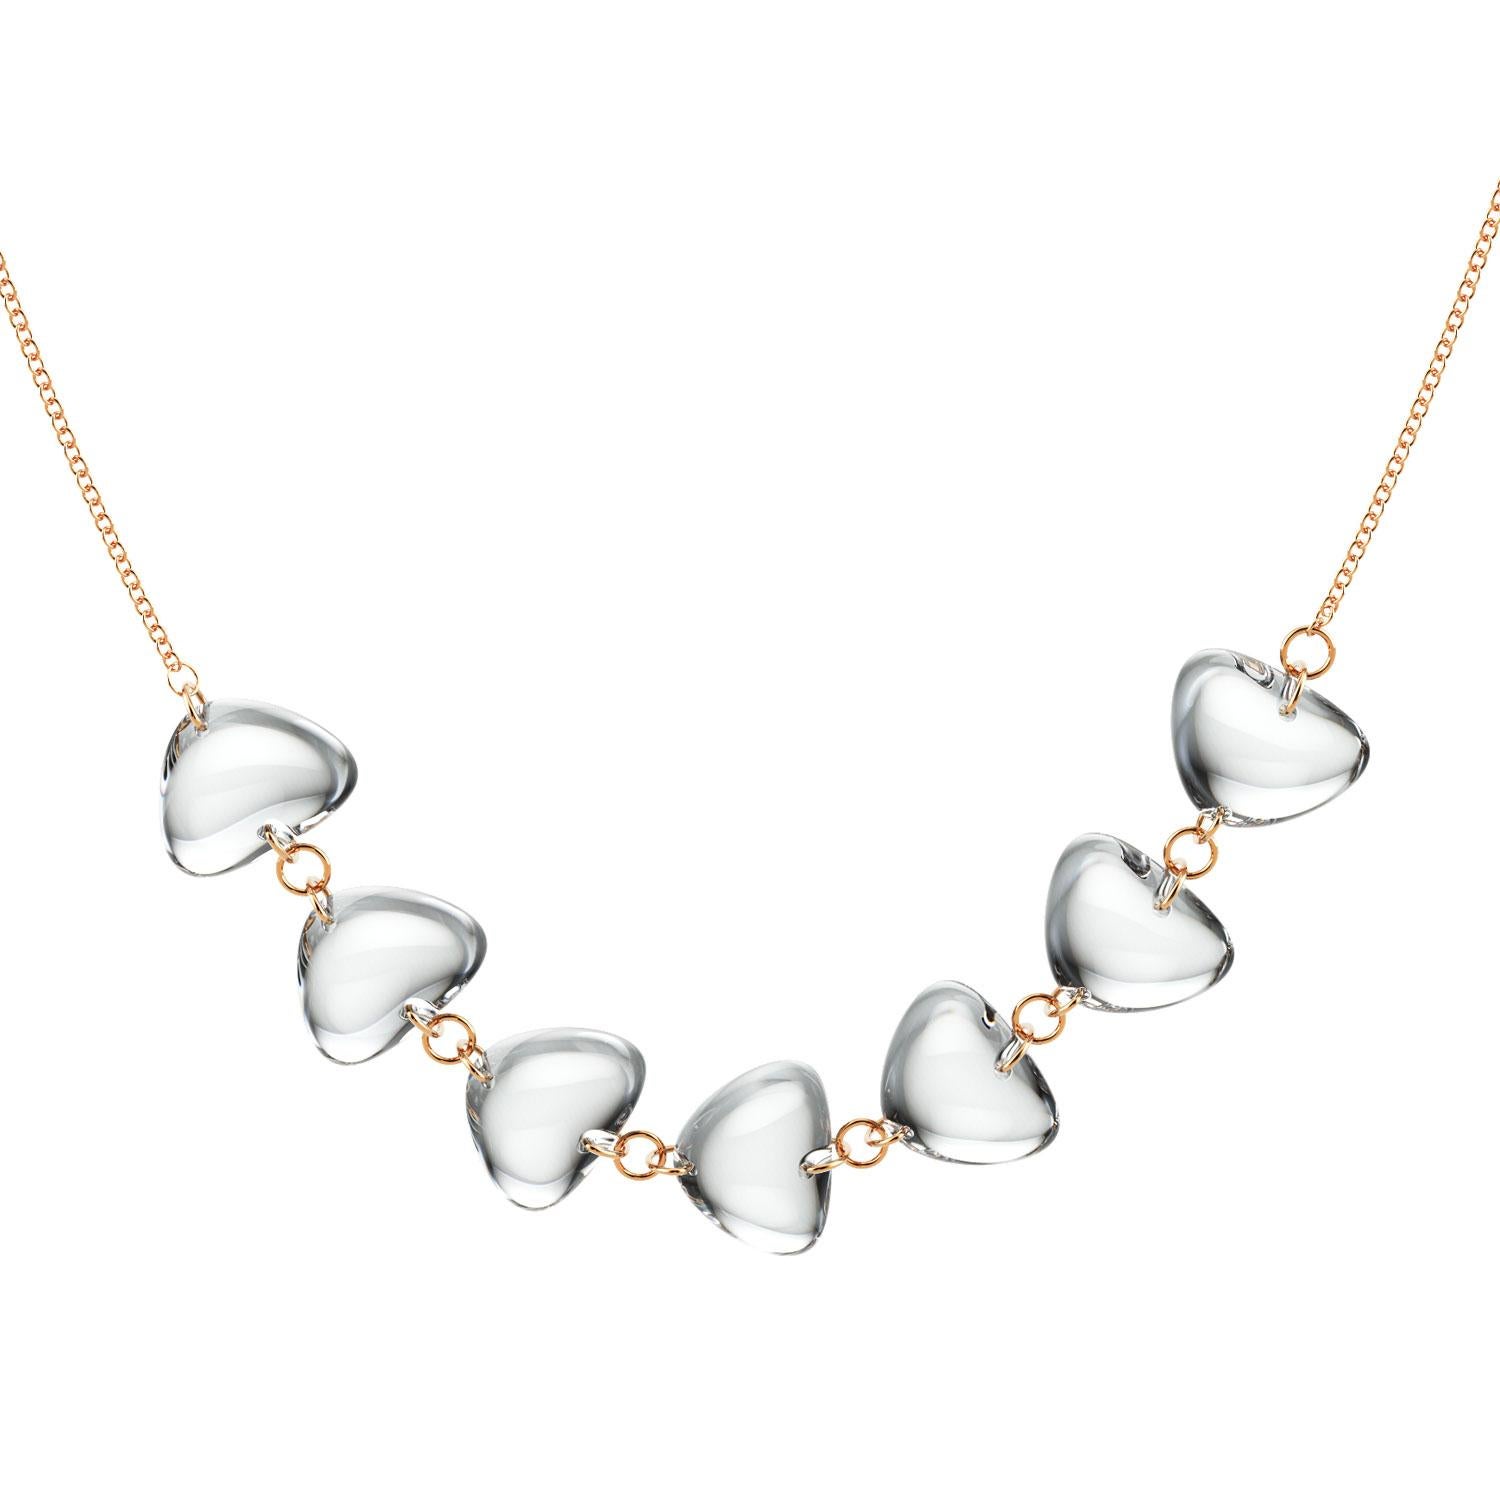 Rebecca Li 18K Rose Gold Contemporary Necklace with Natural Rock Crystal